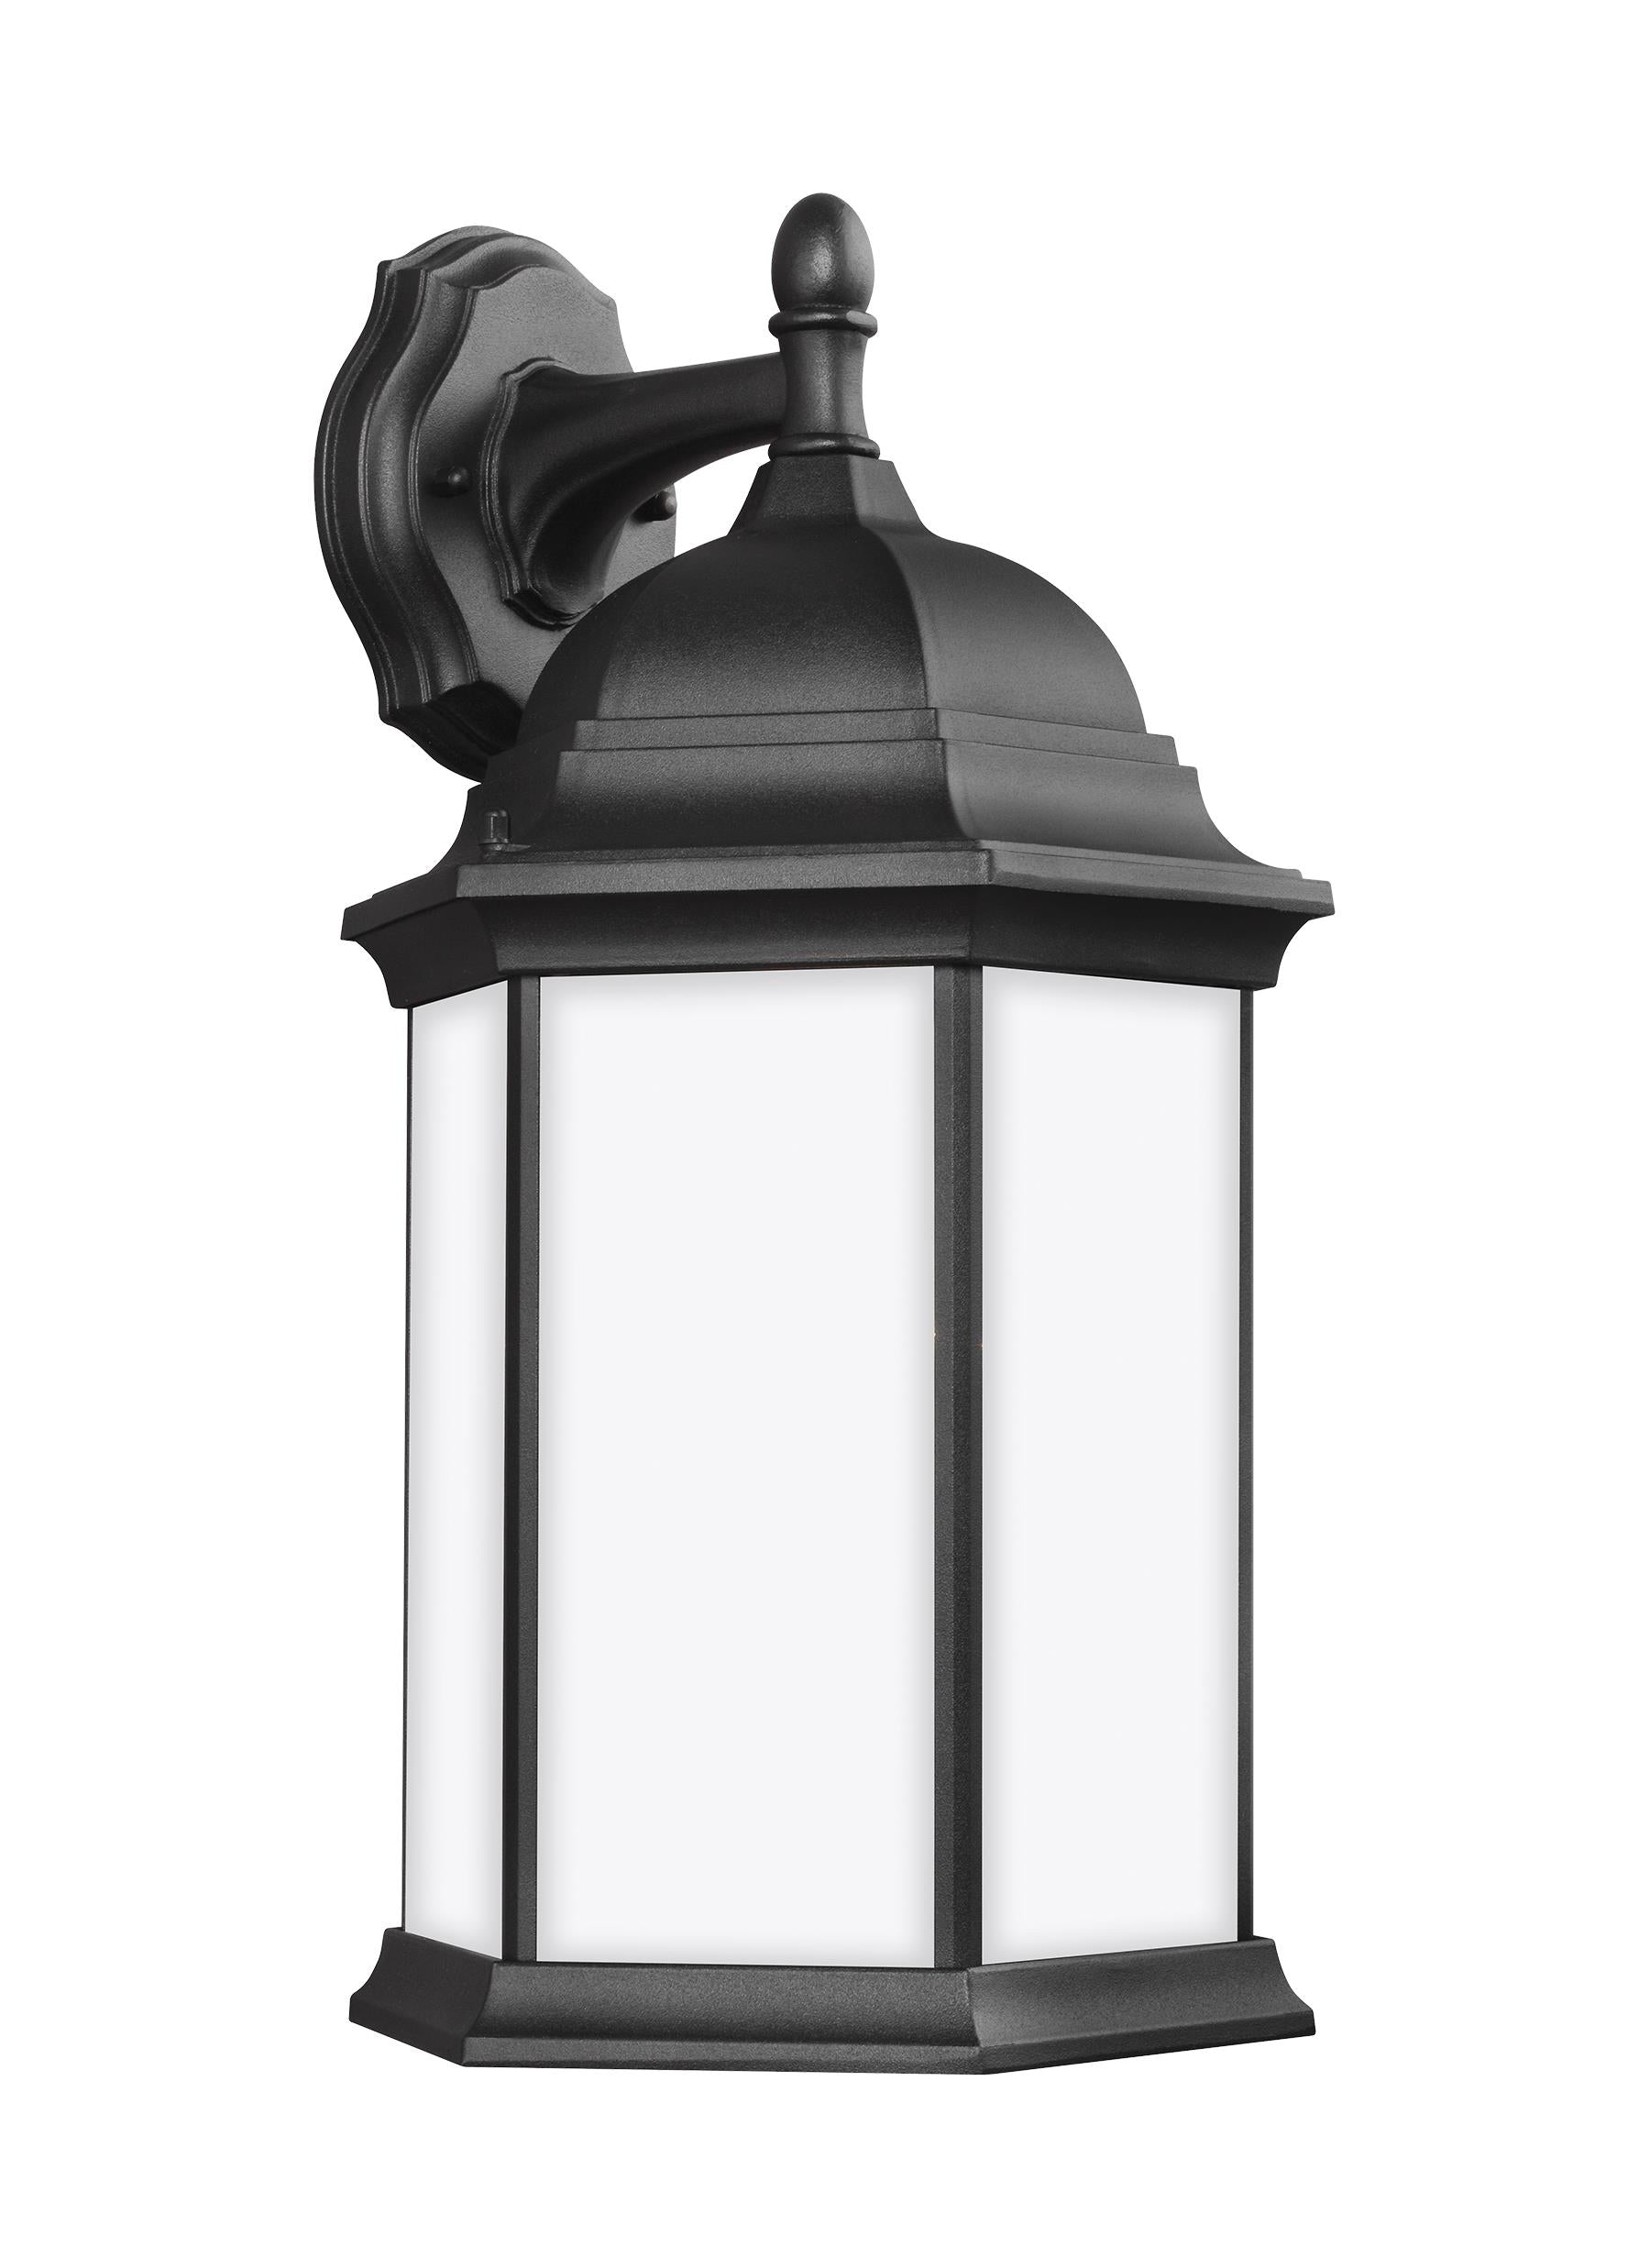 Sevier traditional 1-light outdoor exterior large downlight outdoor wall lantern sconce in black finish with satin etched ...